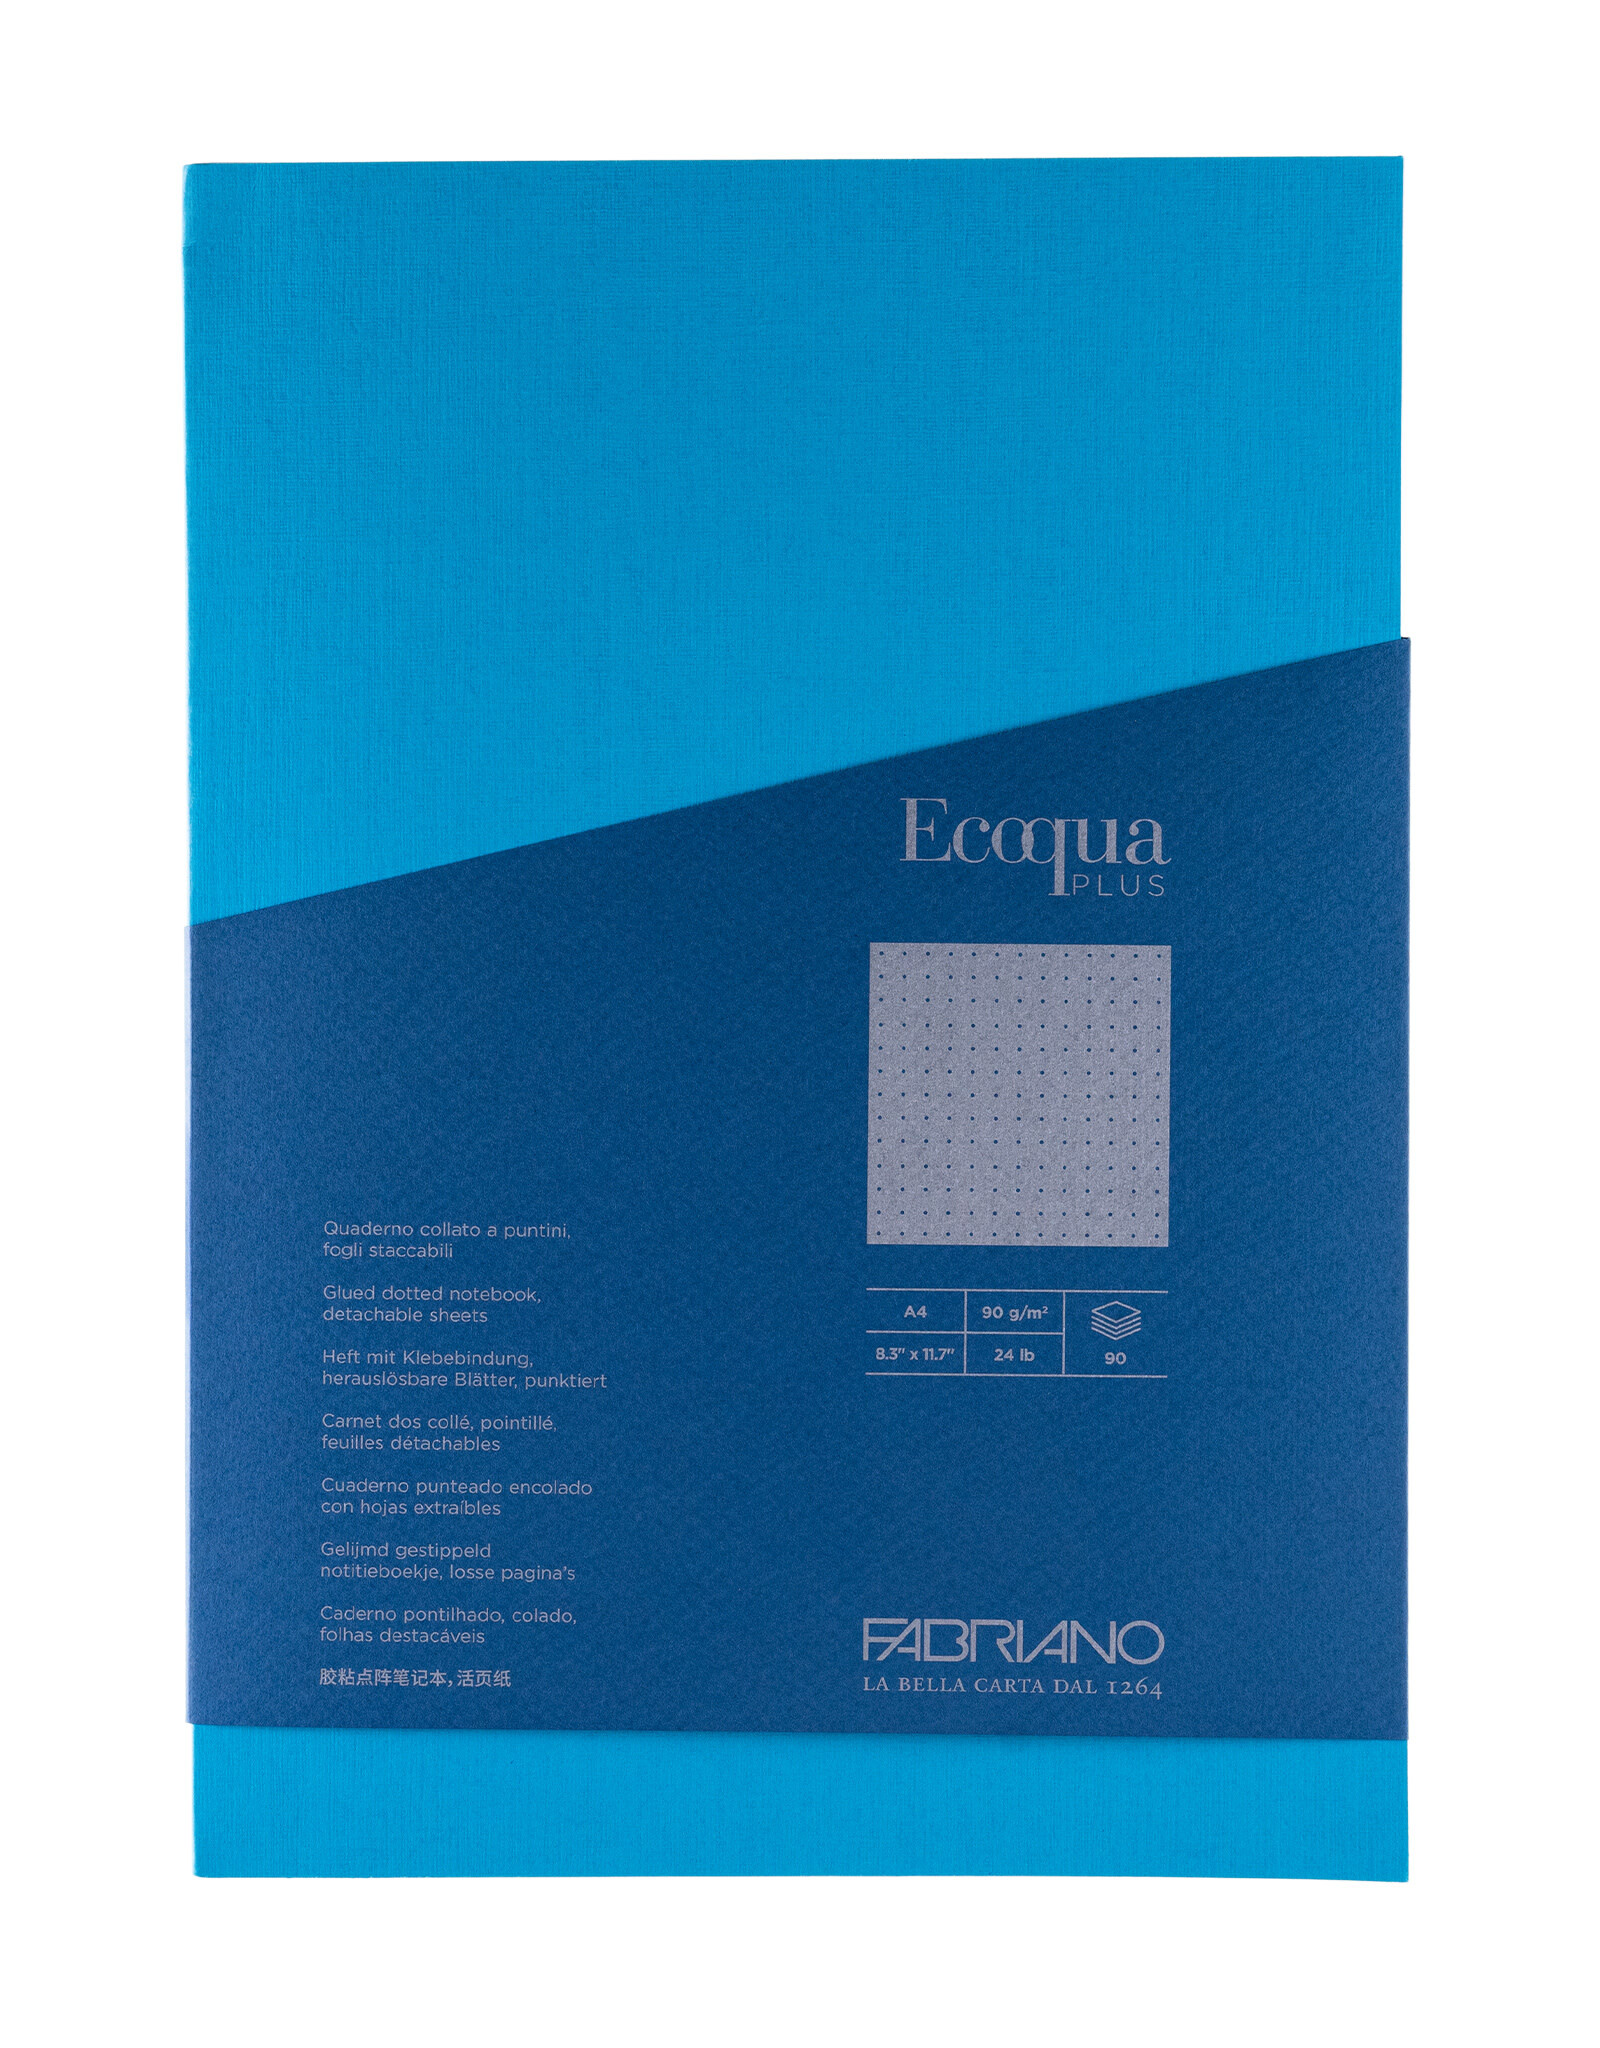 Ecoqua Plus Glue Bound Notebook, Turquoise, A4, Dotted